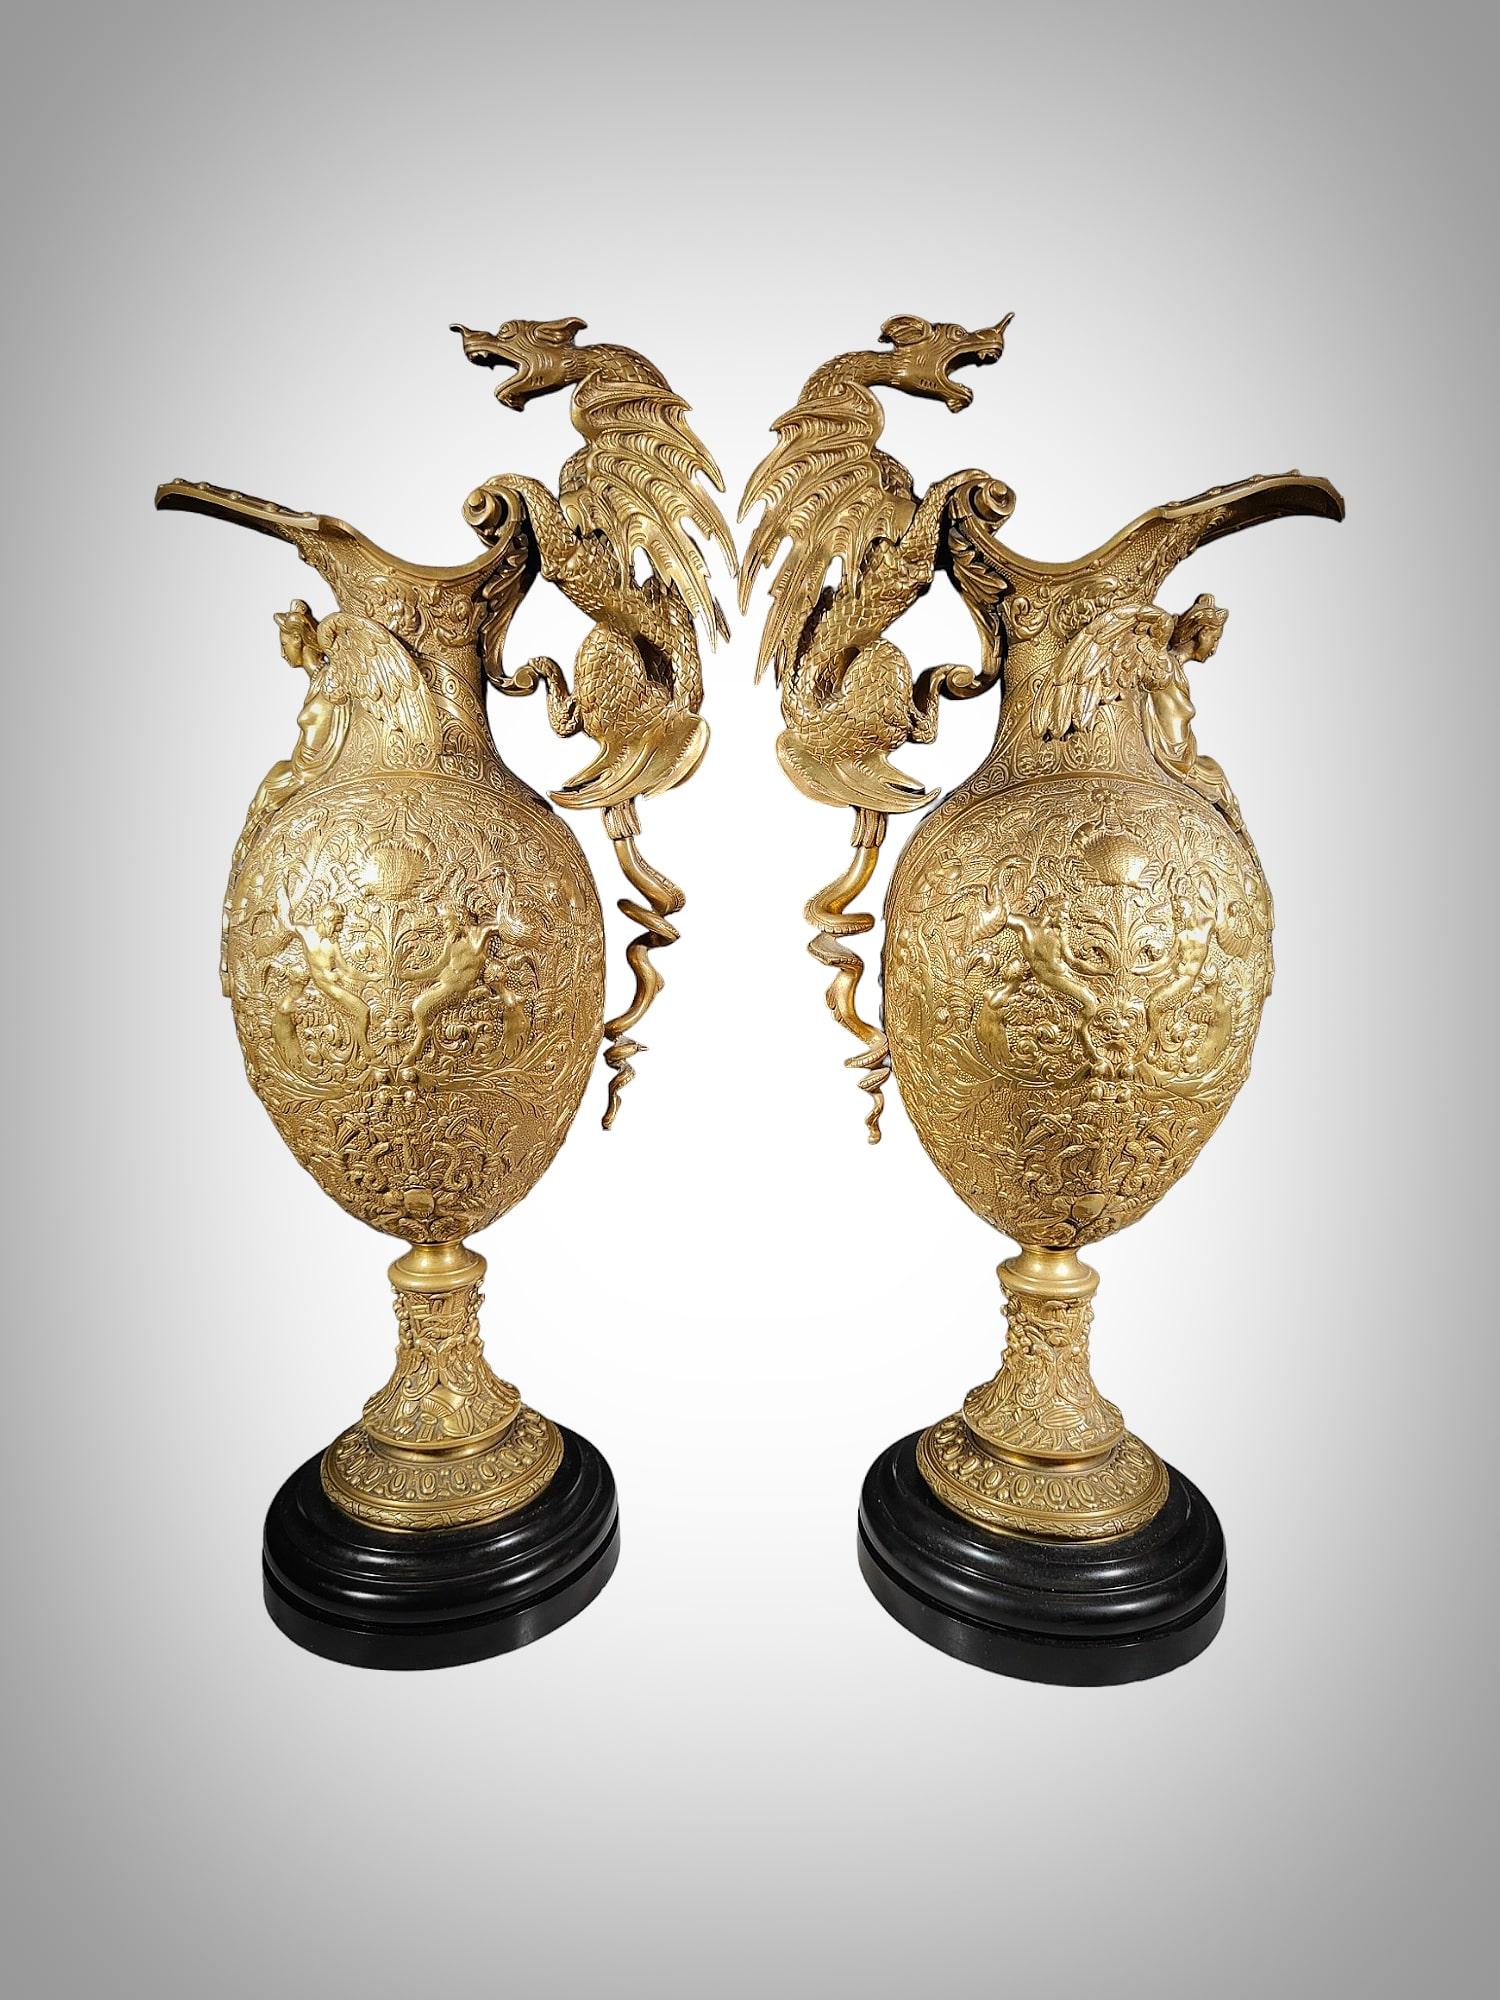 Magnificent Gilded Bronze Vases from the 19th Century For Sale 6